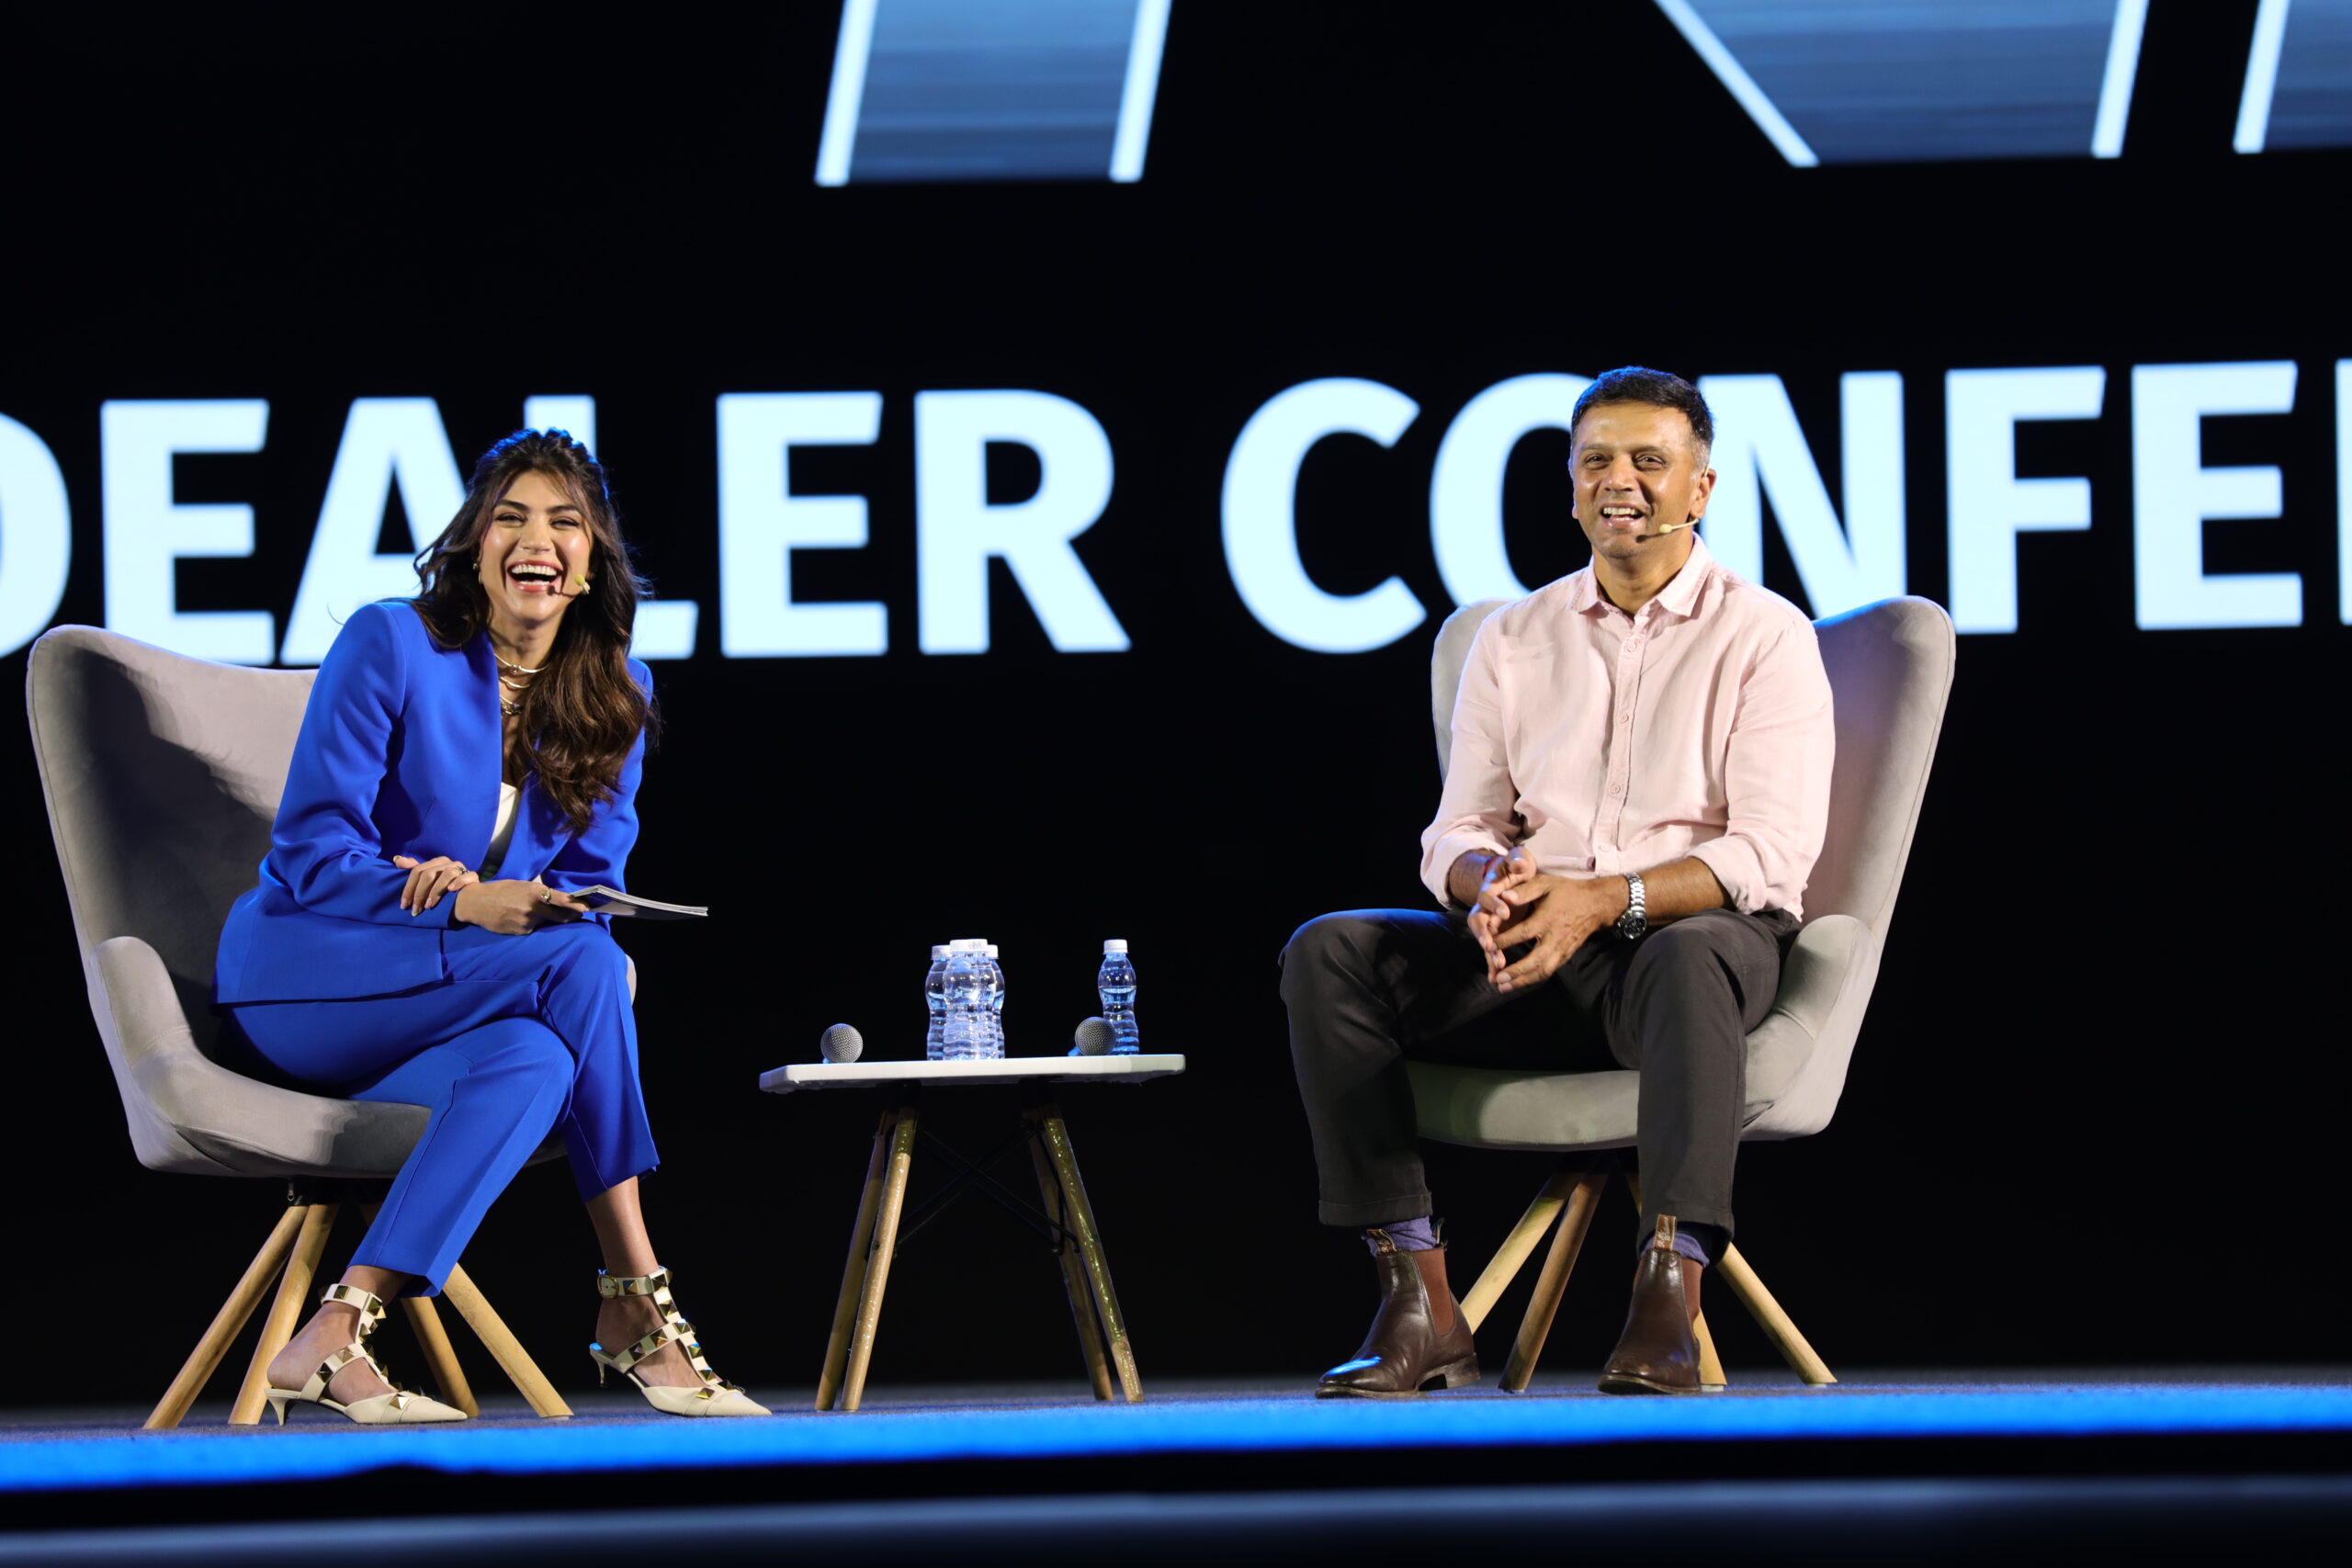 Rahul Dravid as a guest speaker at a corporate event in Mumbai